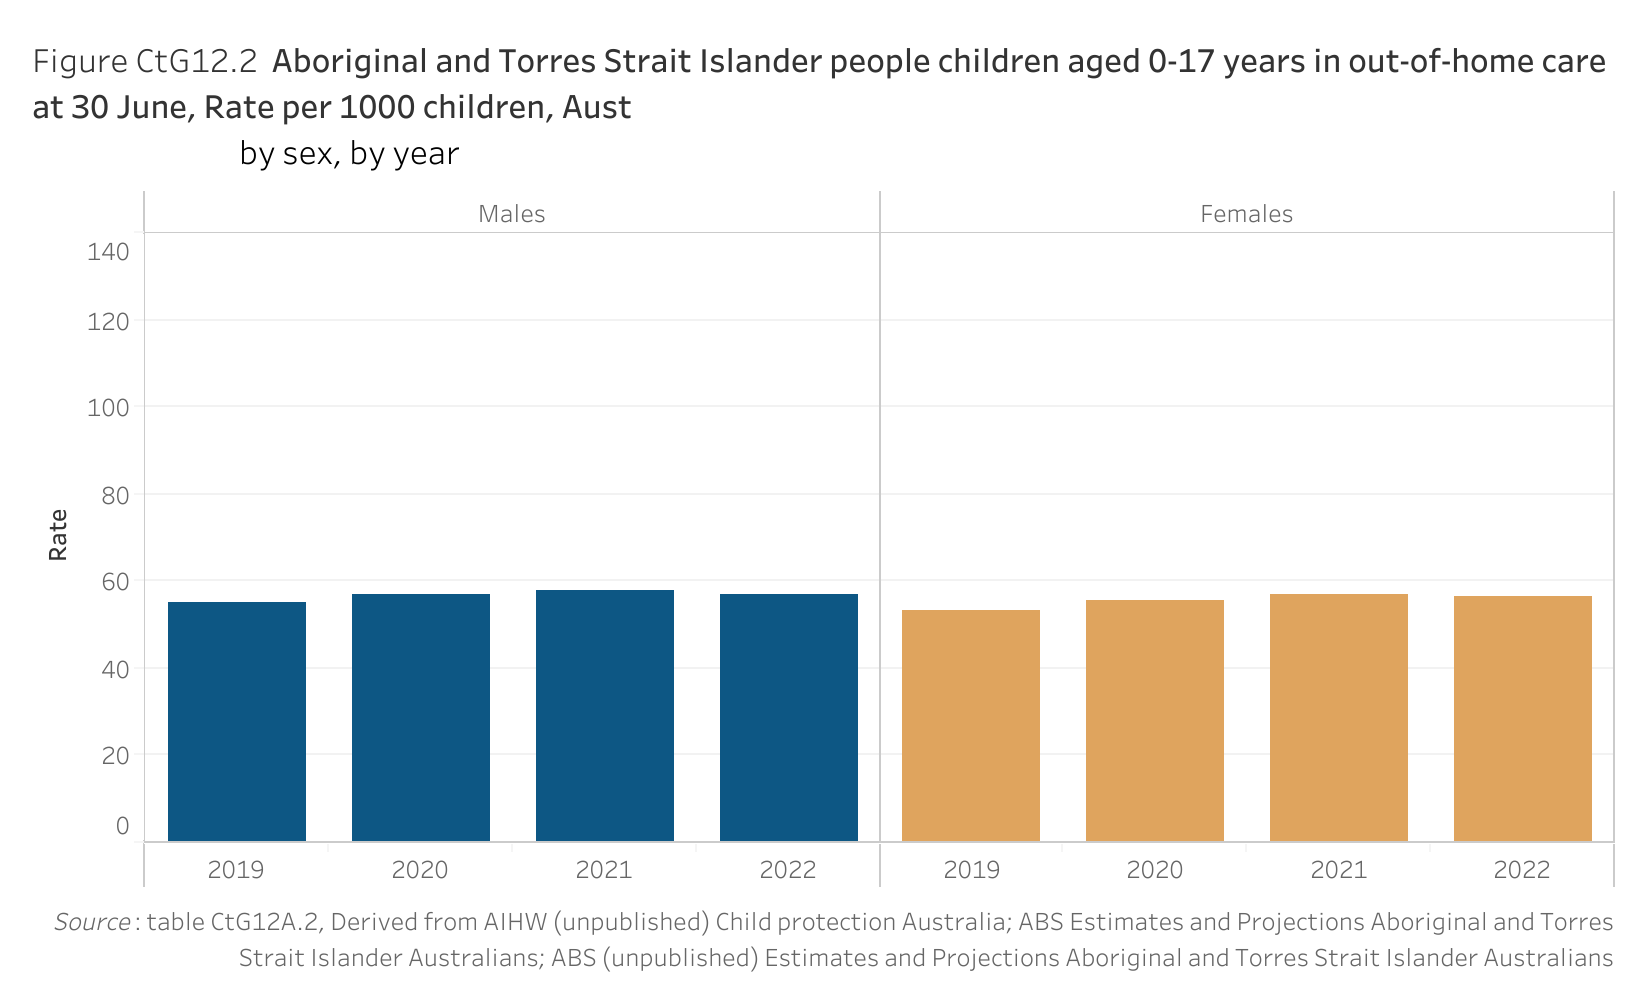 Figure CtG12.2 shows Aboriginal and Torres Strait Islander people children aged 0-17 years in out-of-home care at 30 June, Rate per 1000 children, Australia, by sex, by year. More details can be found within the text near this image.